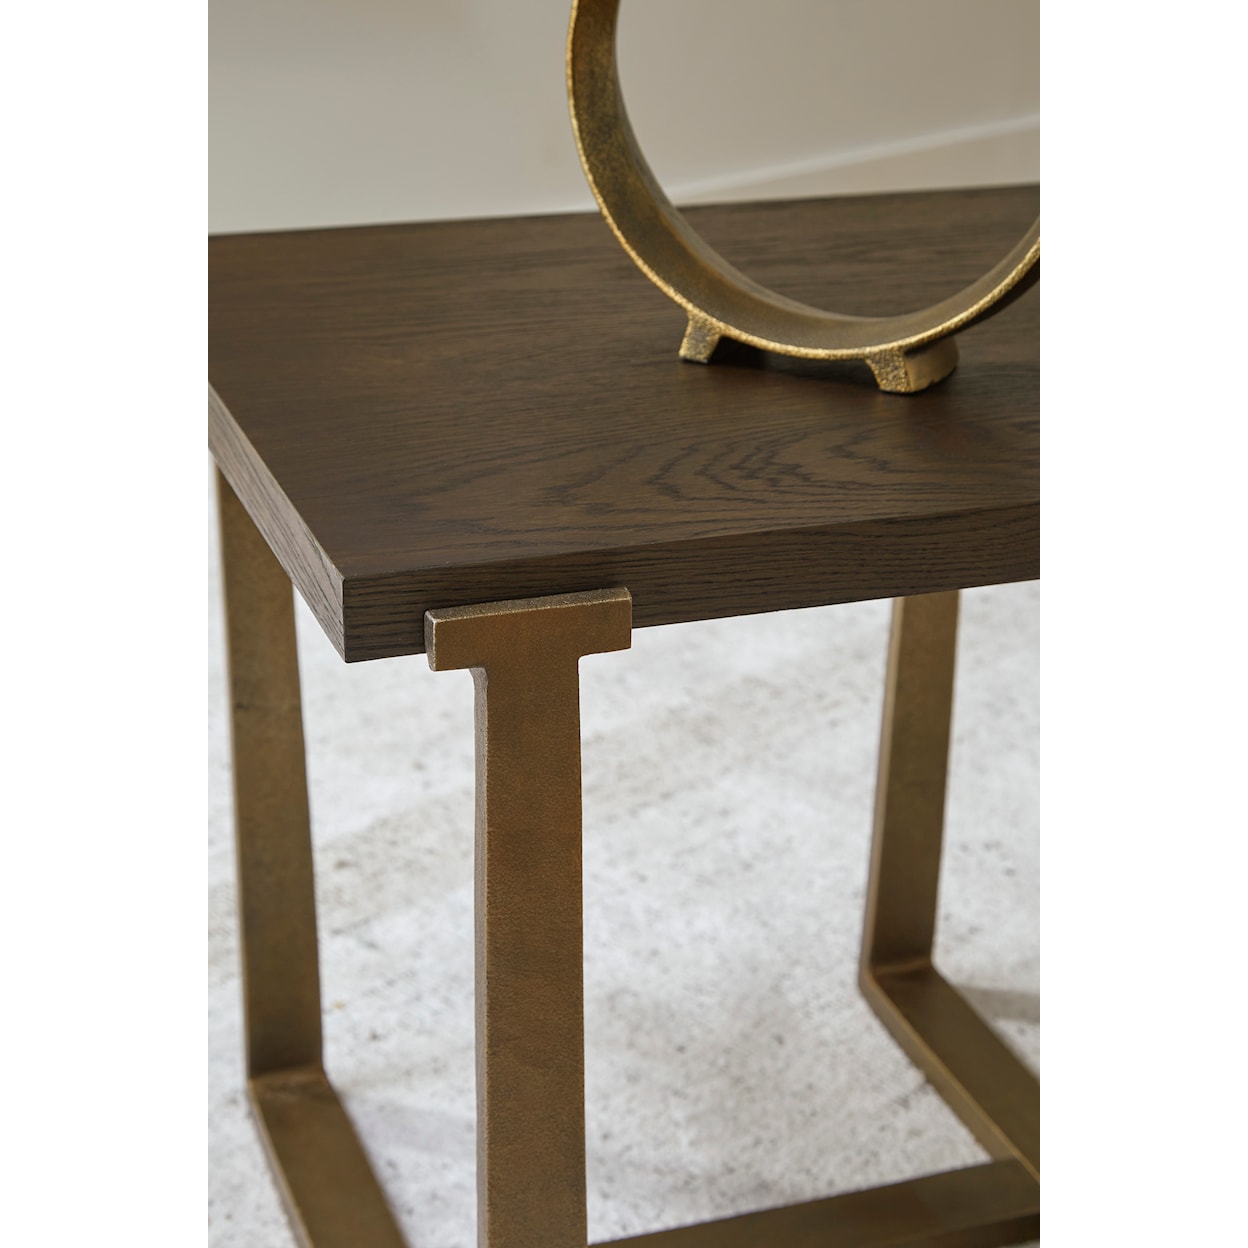 Signature Design by Ashley Baskins End Table